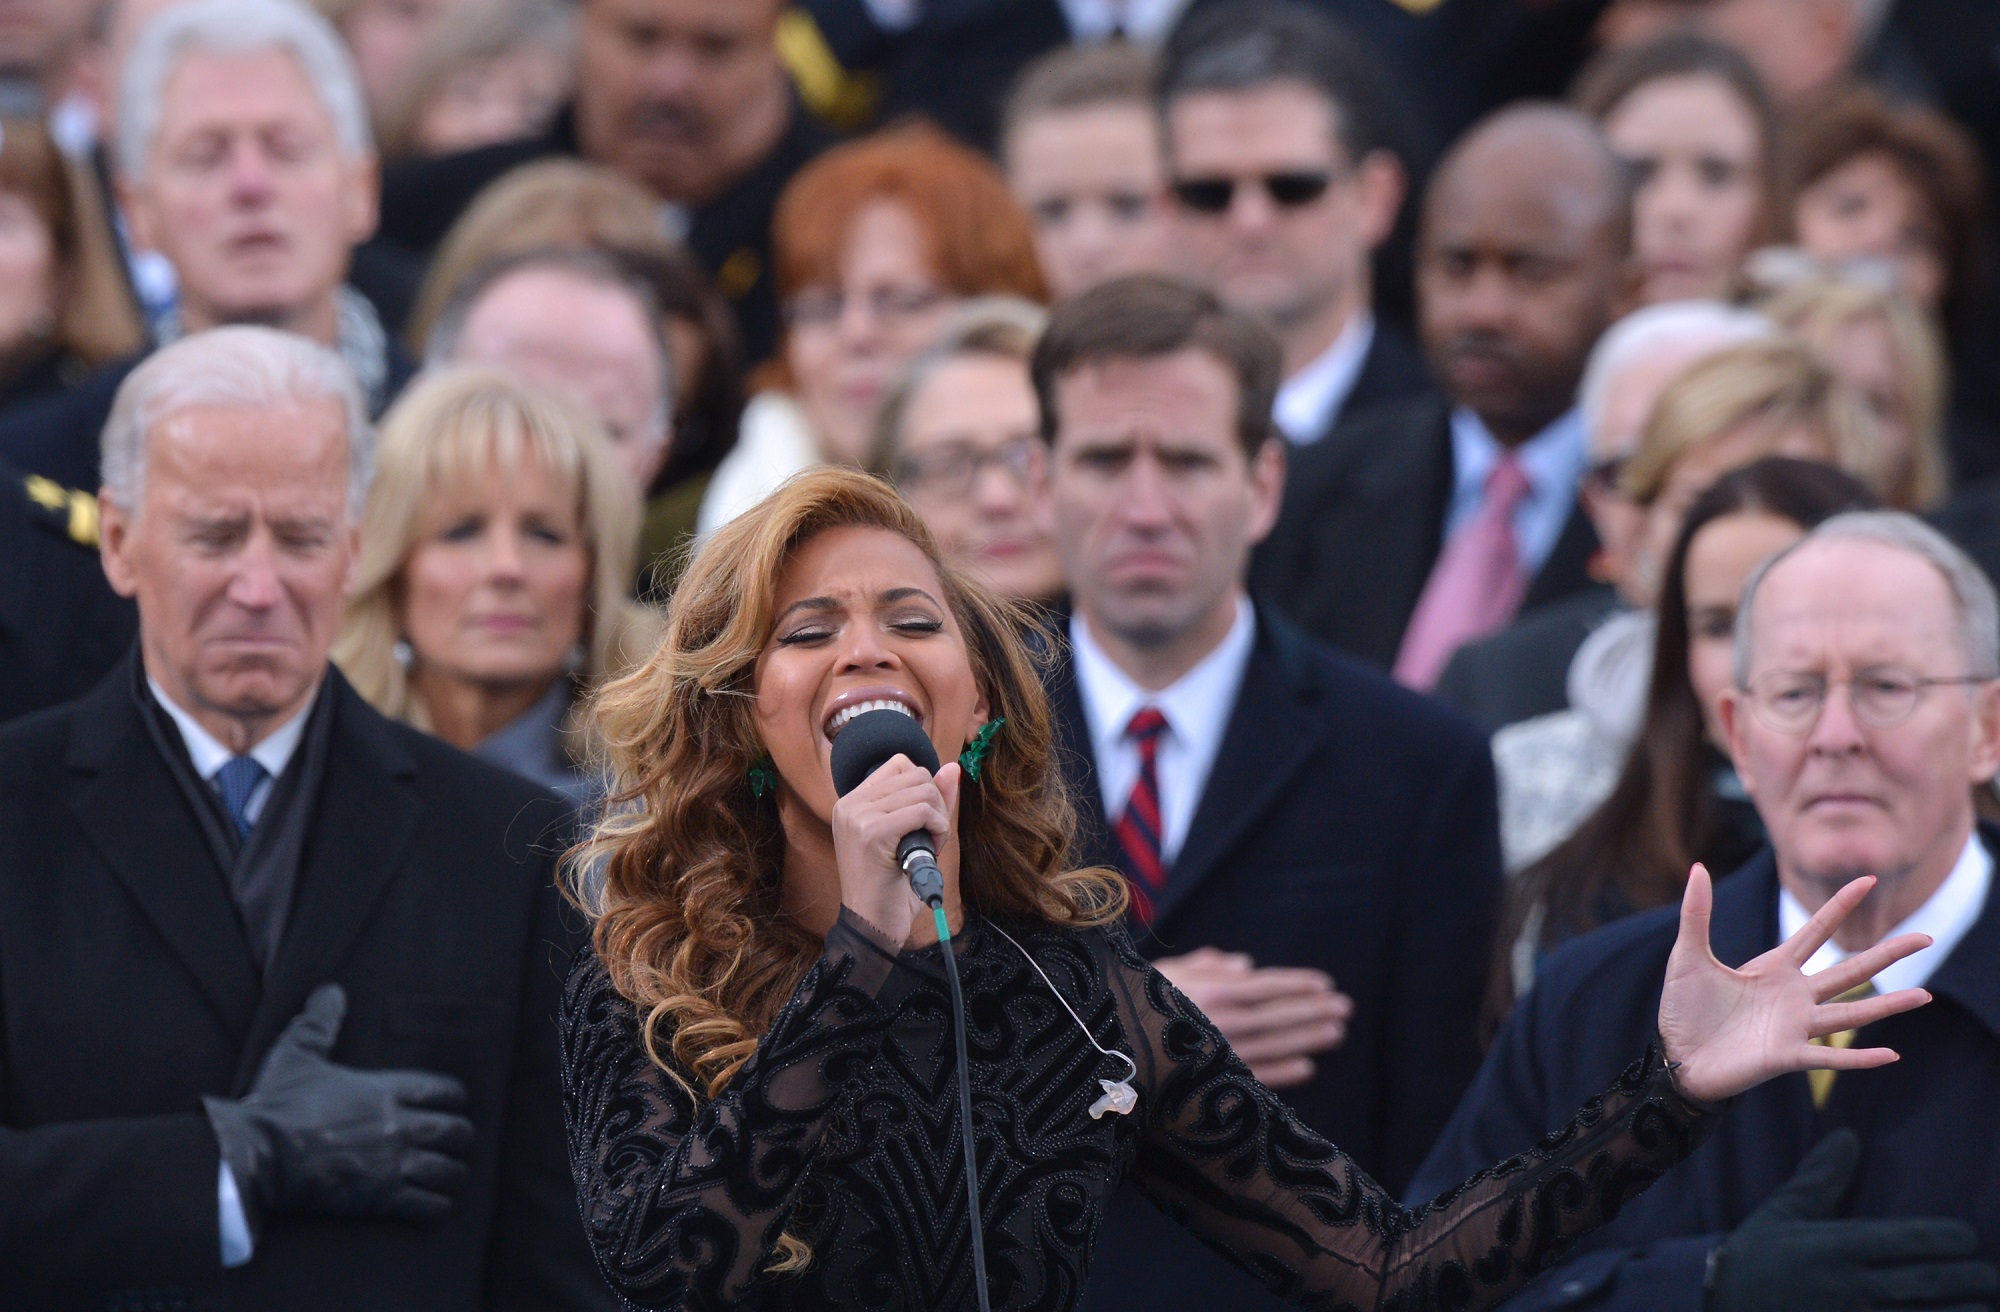 Beyoncé performs the National Anthem as Vice President Joe Biden and more listen during the 57th Presidential Inauguration ceremonial swearing-in at the US Capitol on January 21, 2013, in Washington, DC. 